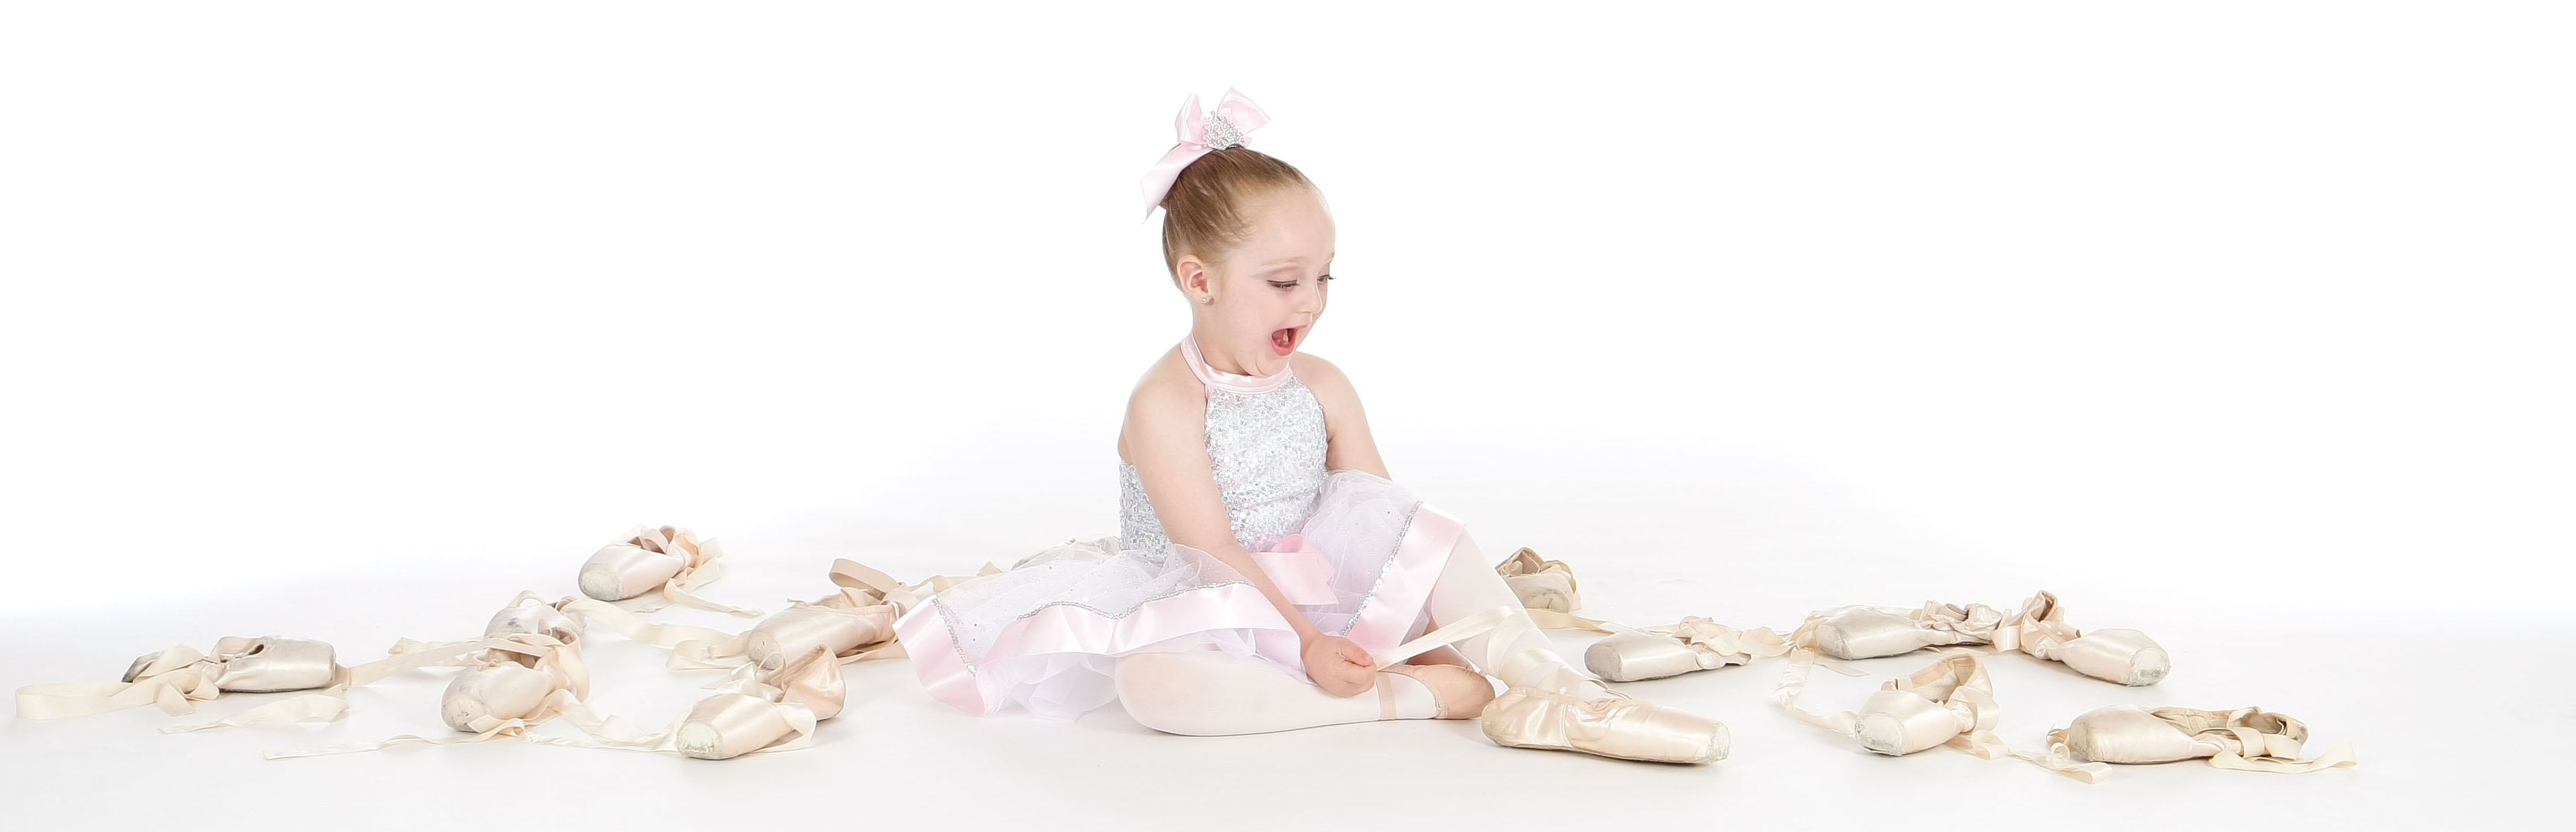 little girl playing with ballet point shoes dressed in pink